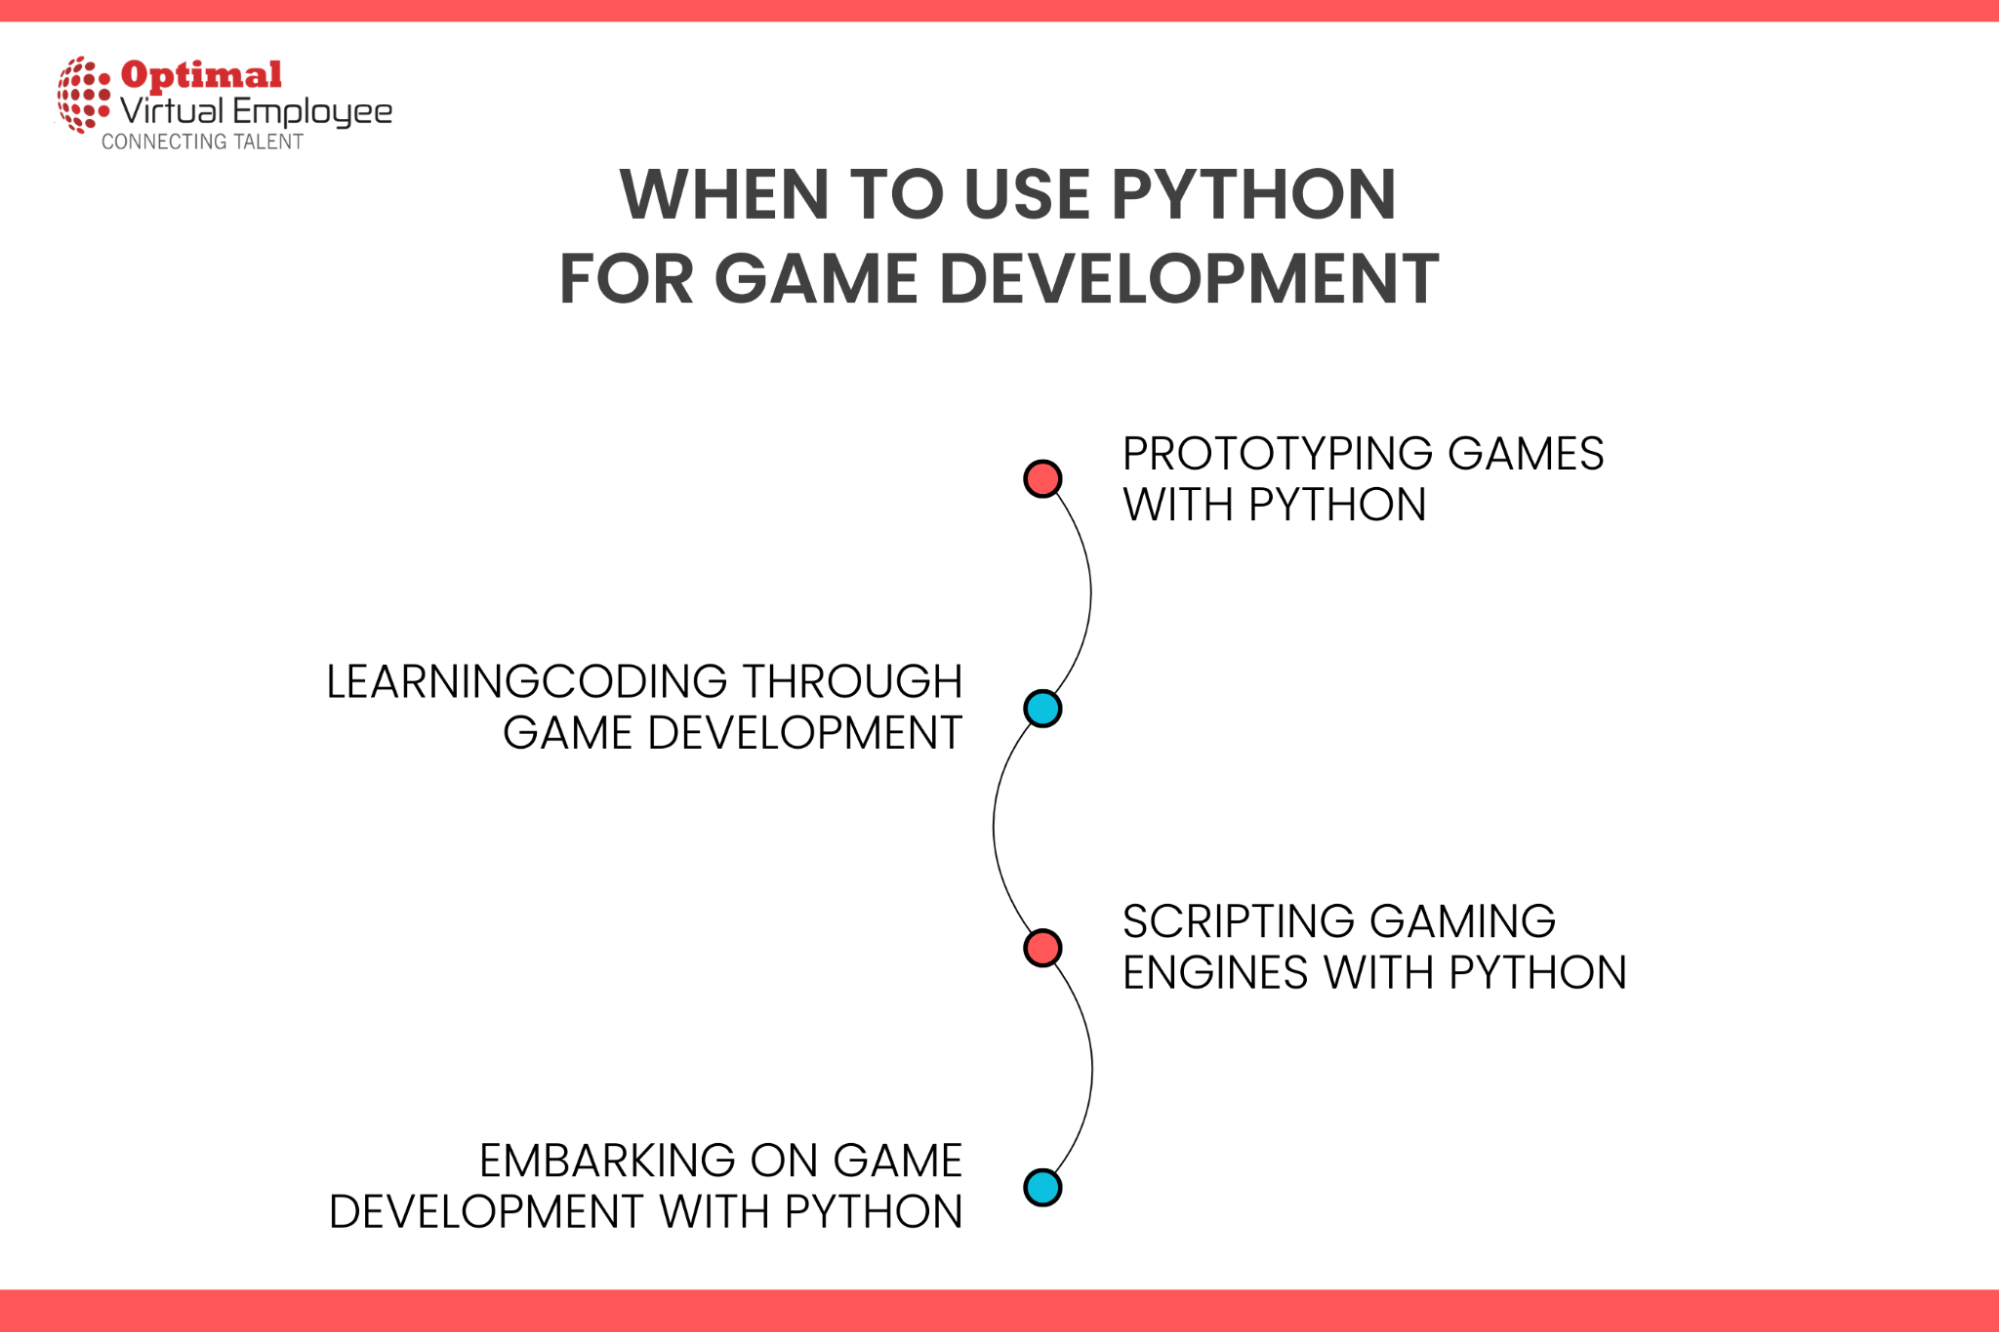 When to use Python for game development